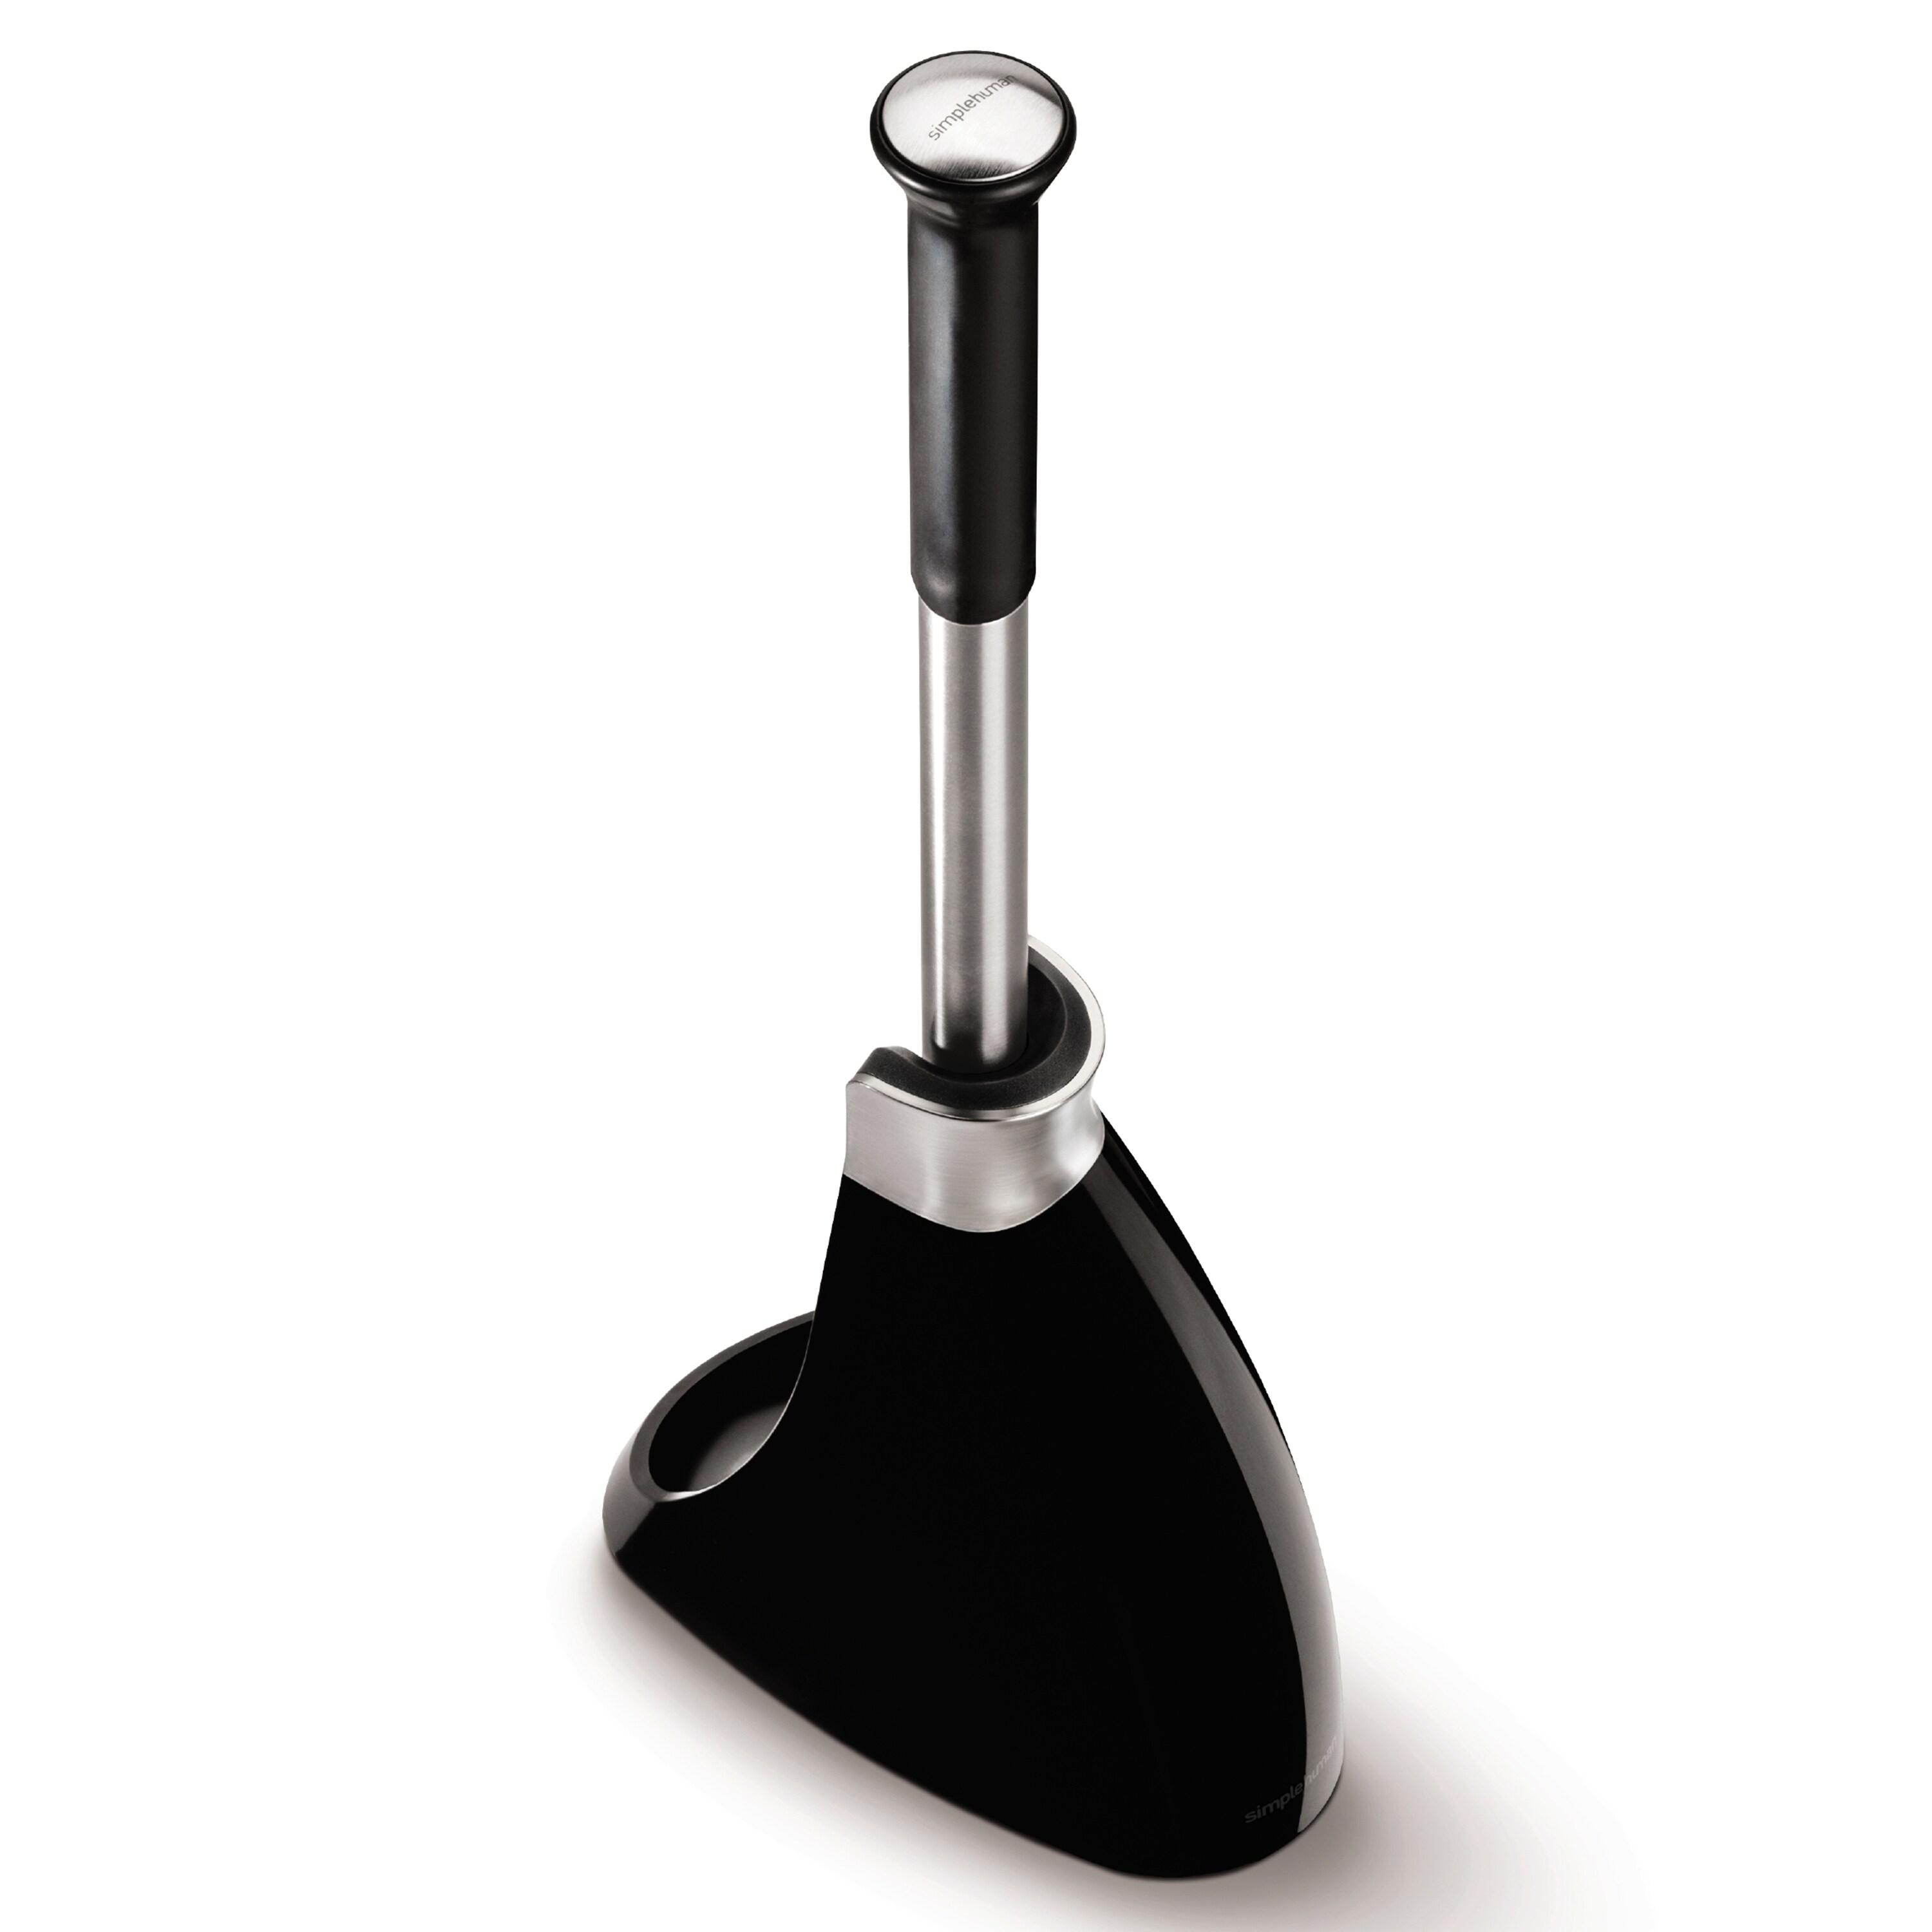 Why You Need a Well Designed Toilet Plunger - Simplehuman Plunger Review 